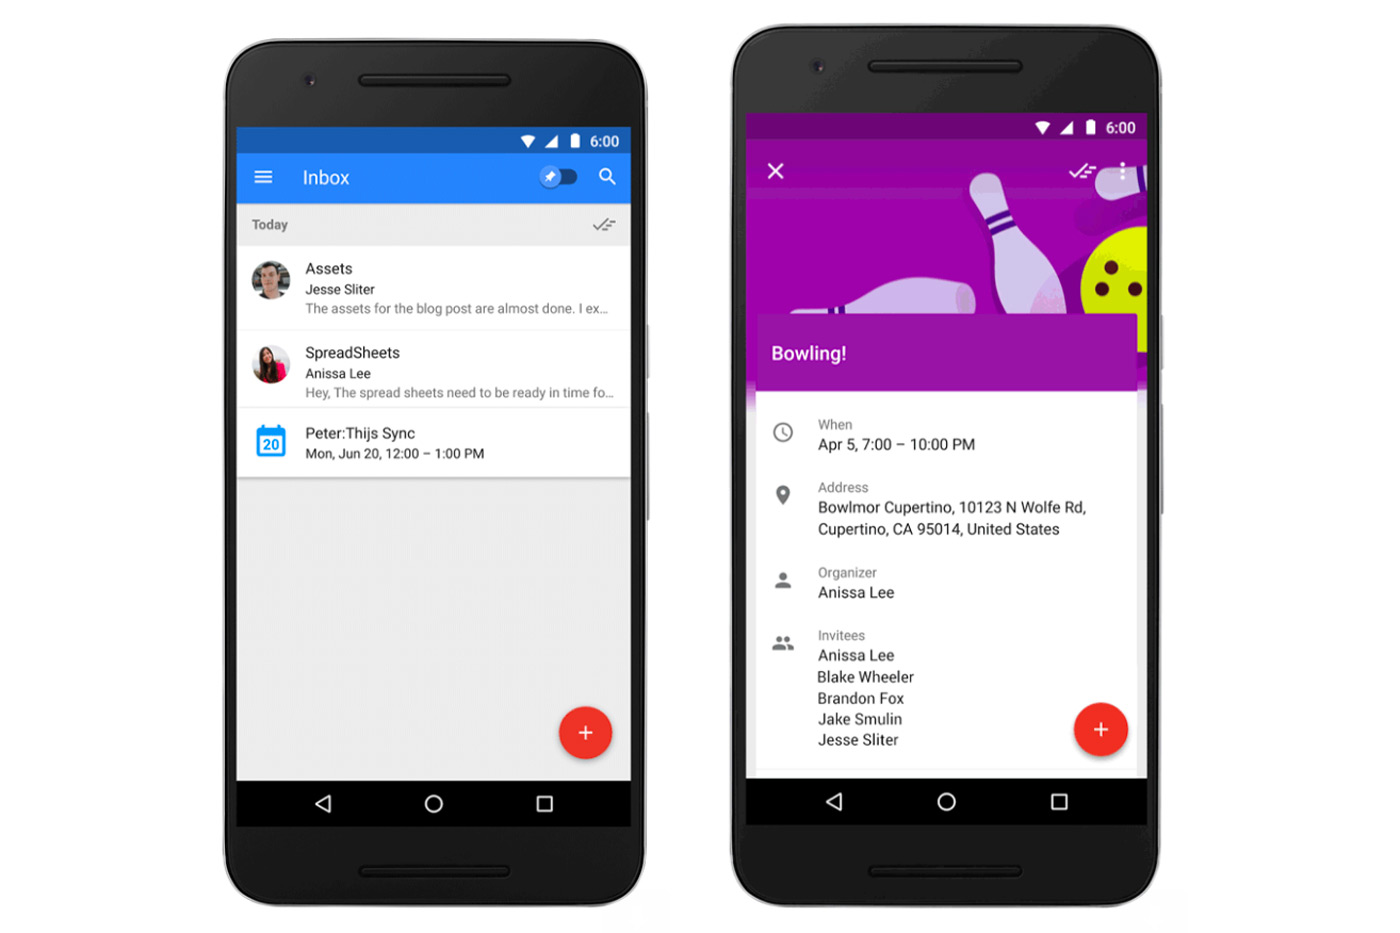 Google Inbox can keep up with your changing calendar